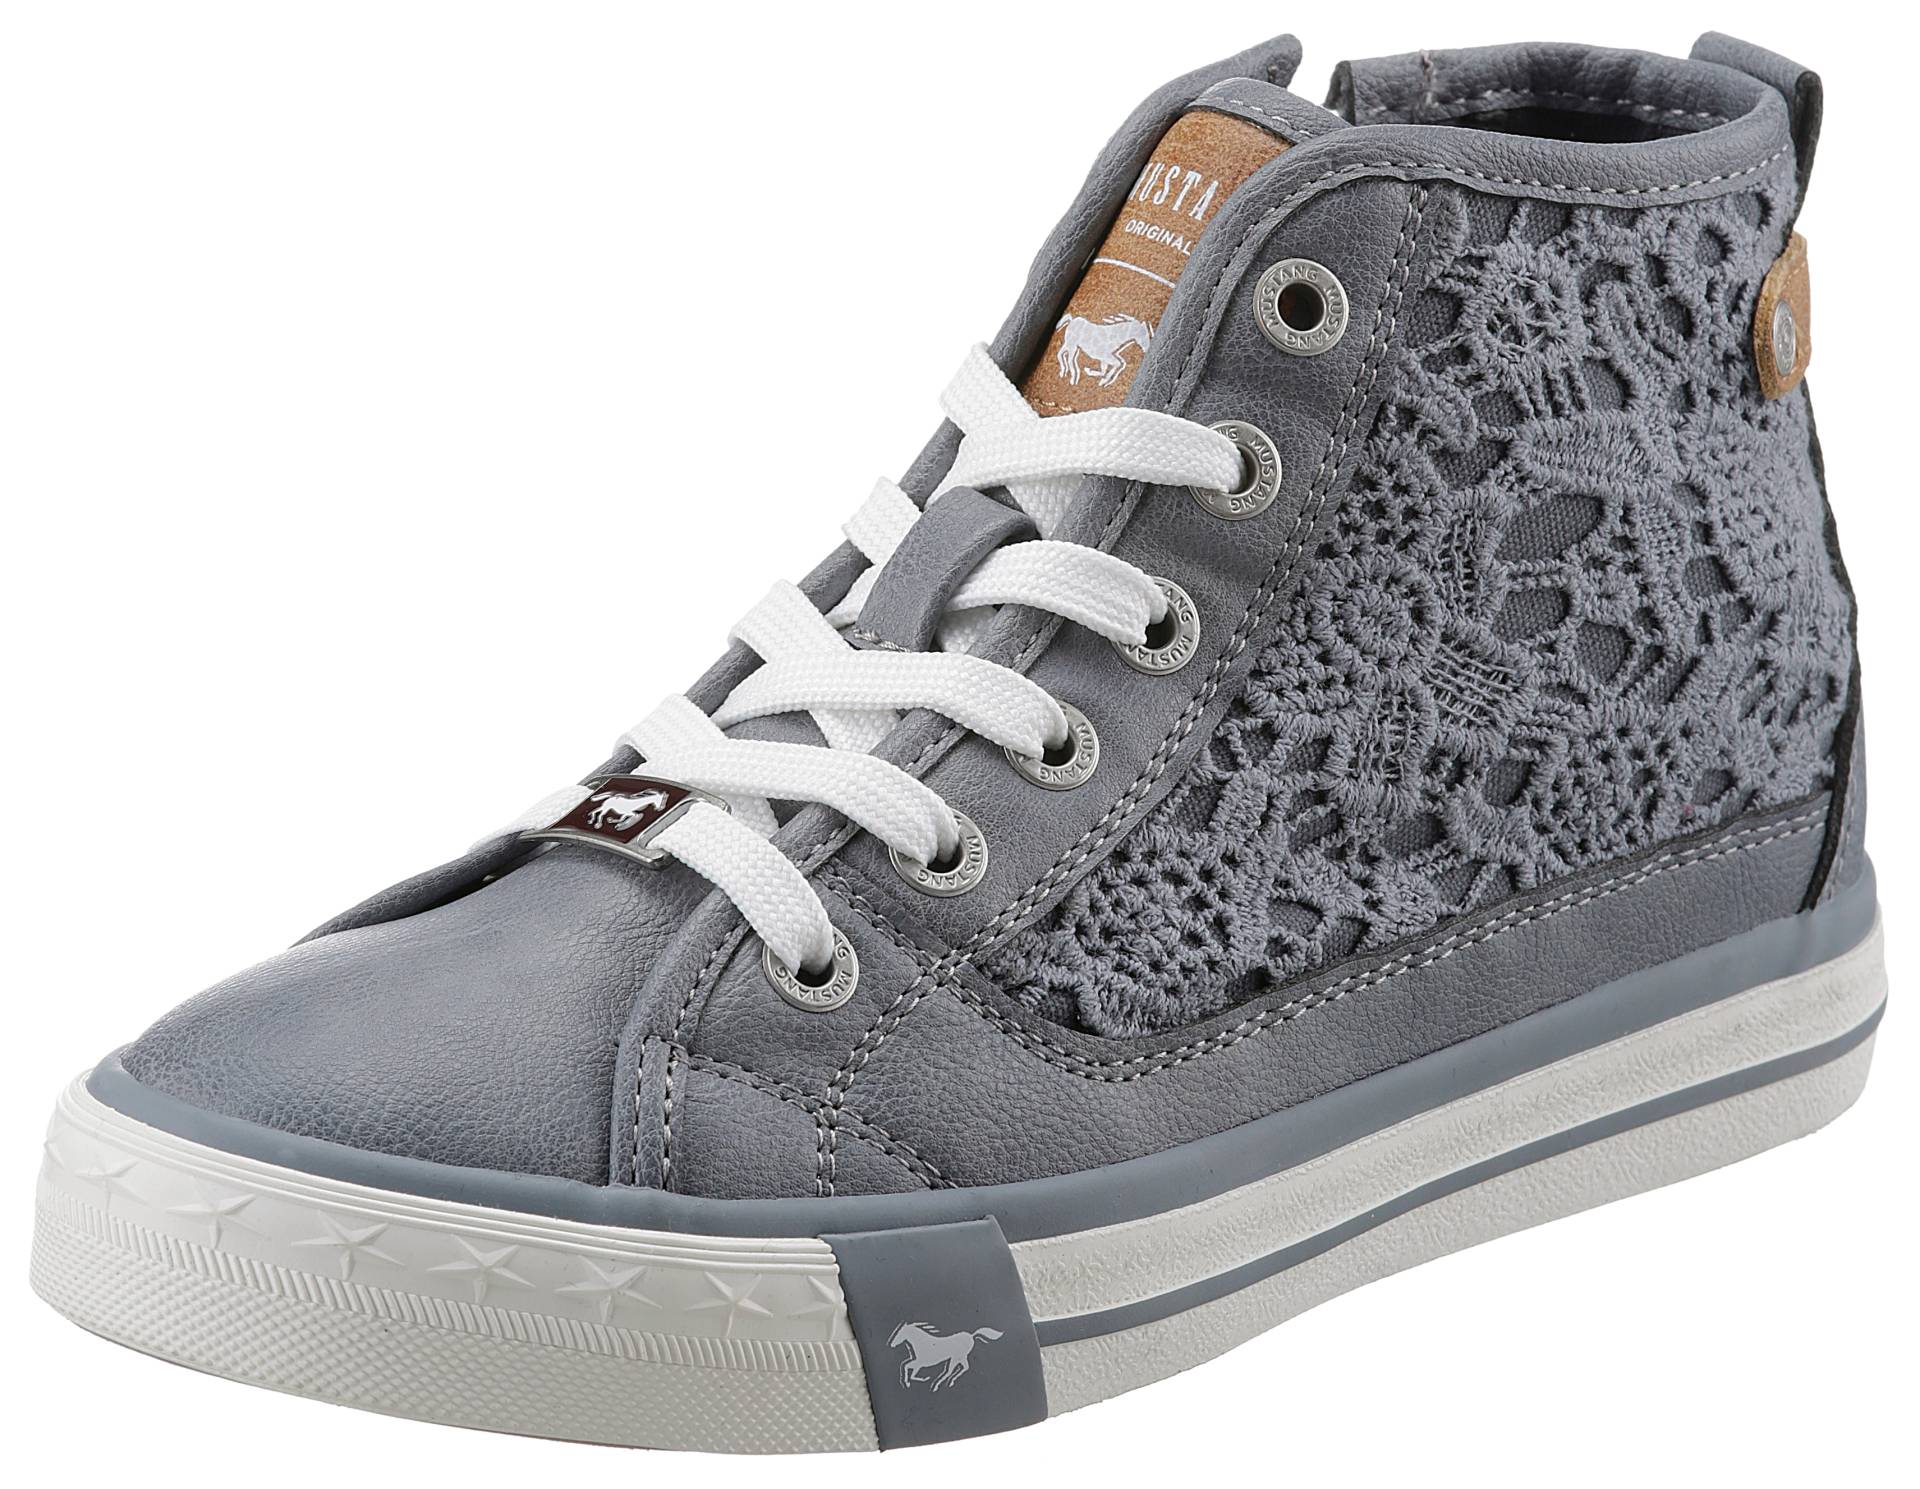 Mustang Shoes Sneaker, mit schöner Perforation von Mustang Shoes